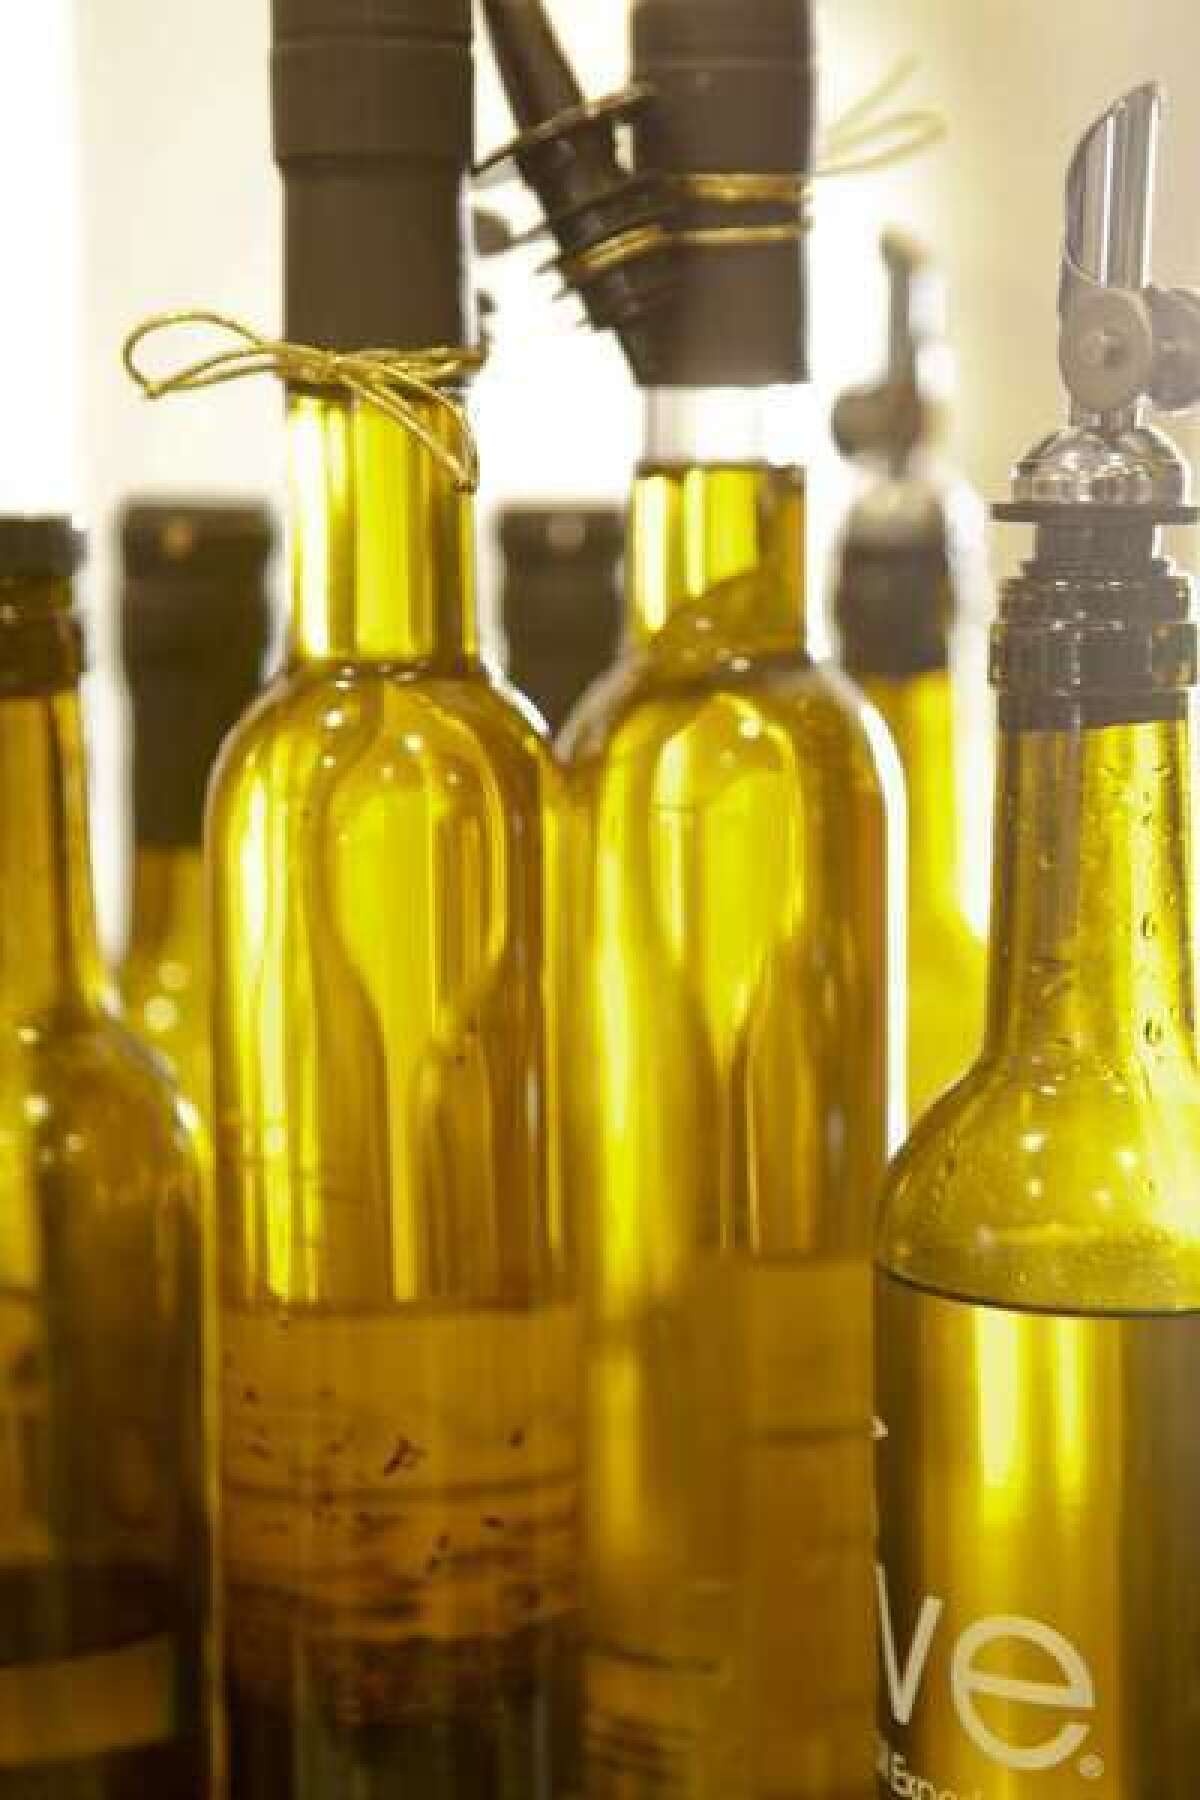 One of the stores in the OC Mart MIX is We Olive & Wine Bar, a wine and olive-oil tasting spot with many different types of olive oils and wines for tasting and purchase at the South Coast Collection in Costa Mesa.